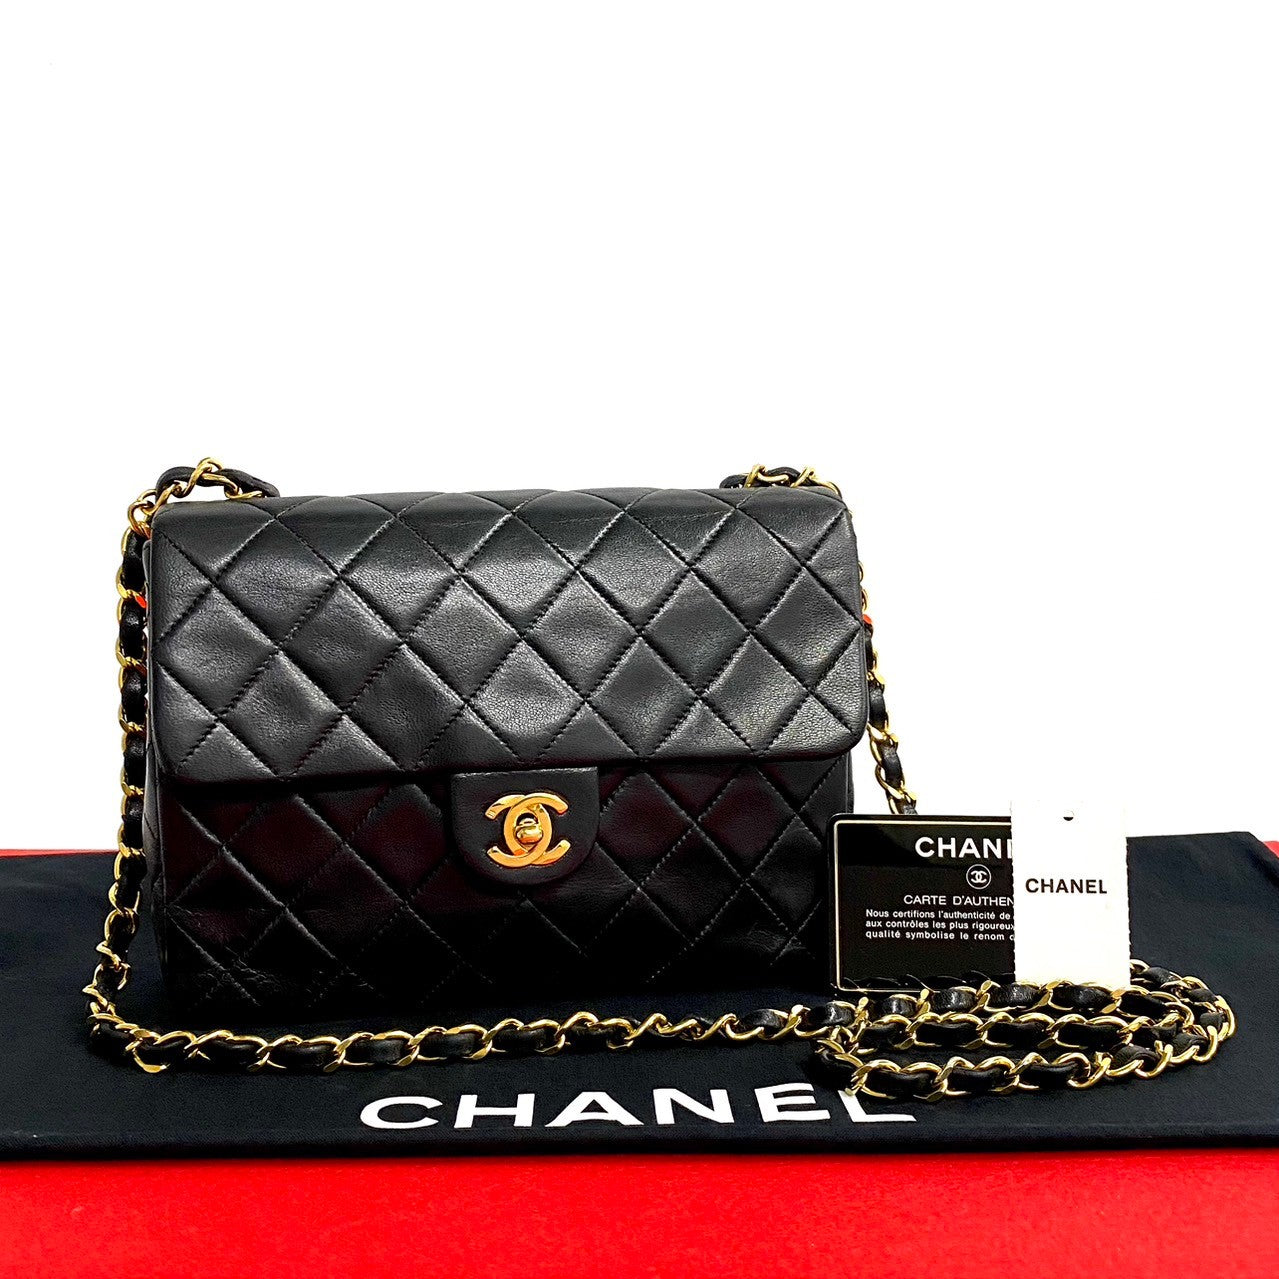 Chanel Classic Mini Single Flap Bag Leather Crossbody Bag in Good condition